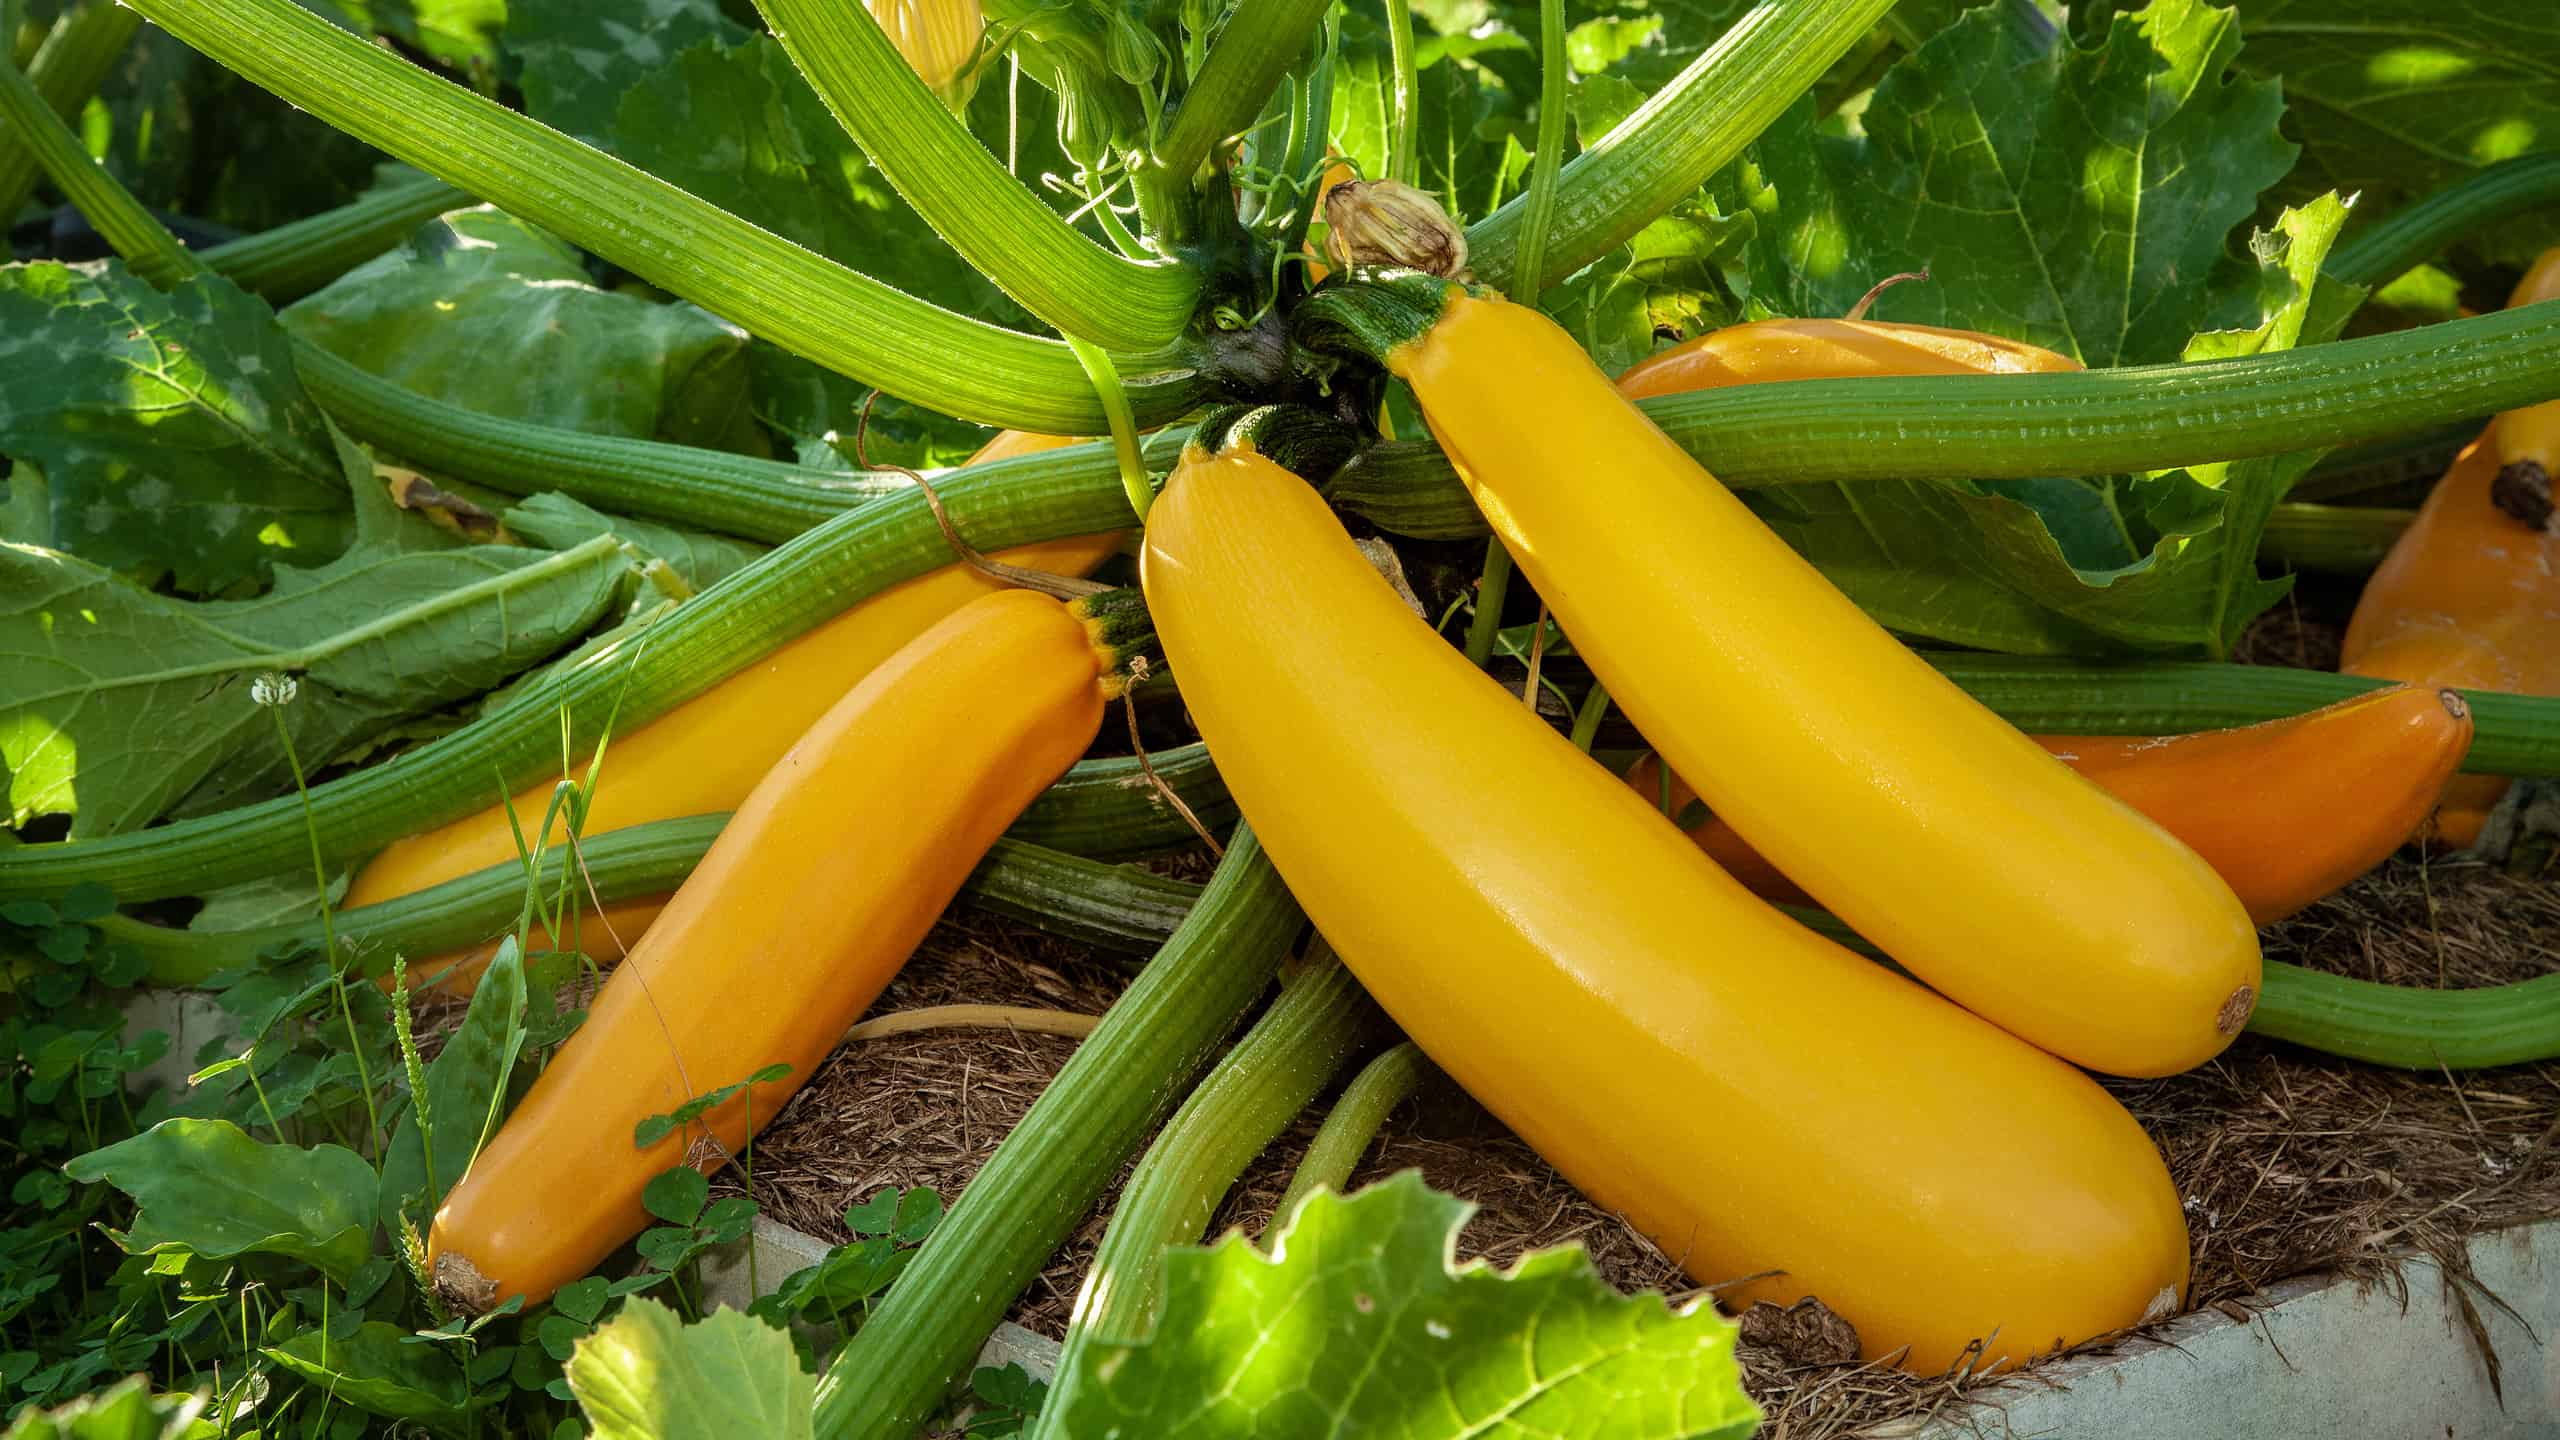 Squash plant with blossoms, yellow zucchini in the garden, organic vegetables.Courgette plant (Cucurbita pepo) with yellow fruits growing in the garden bed outdoors